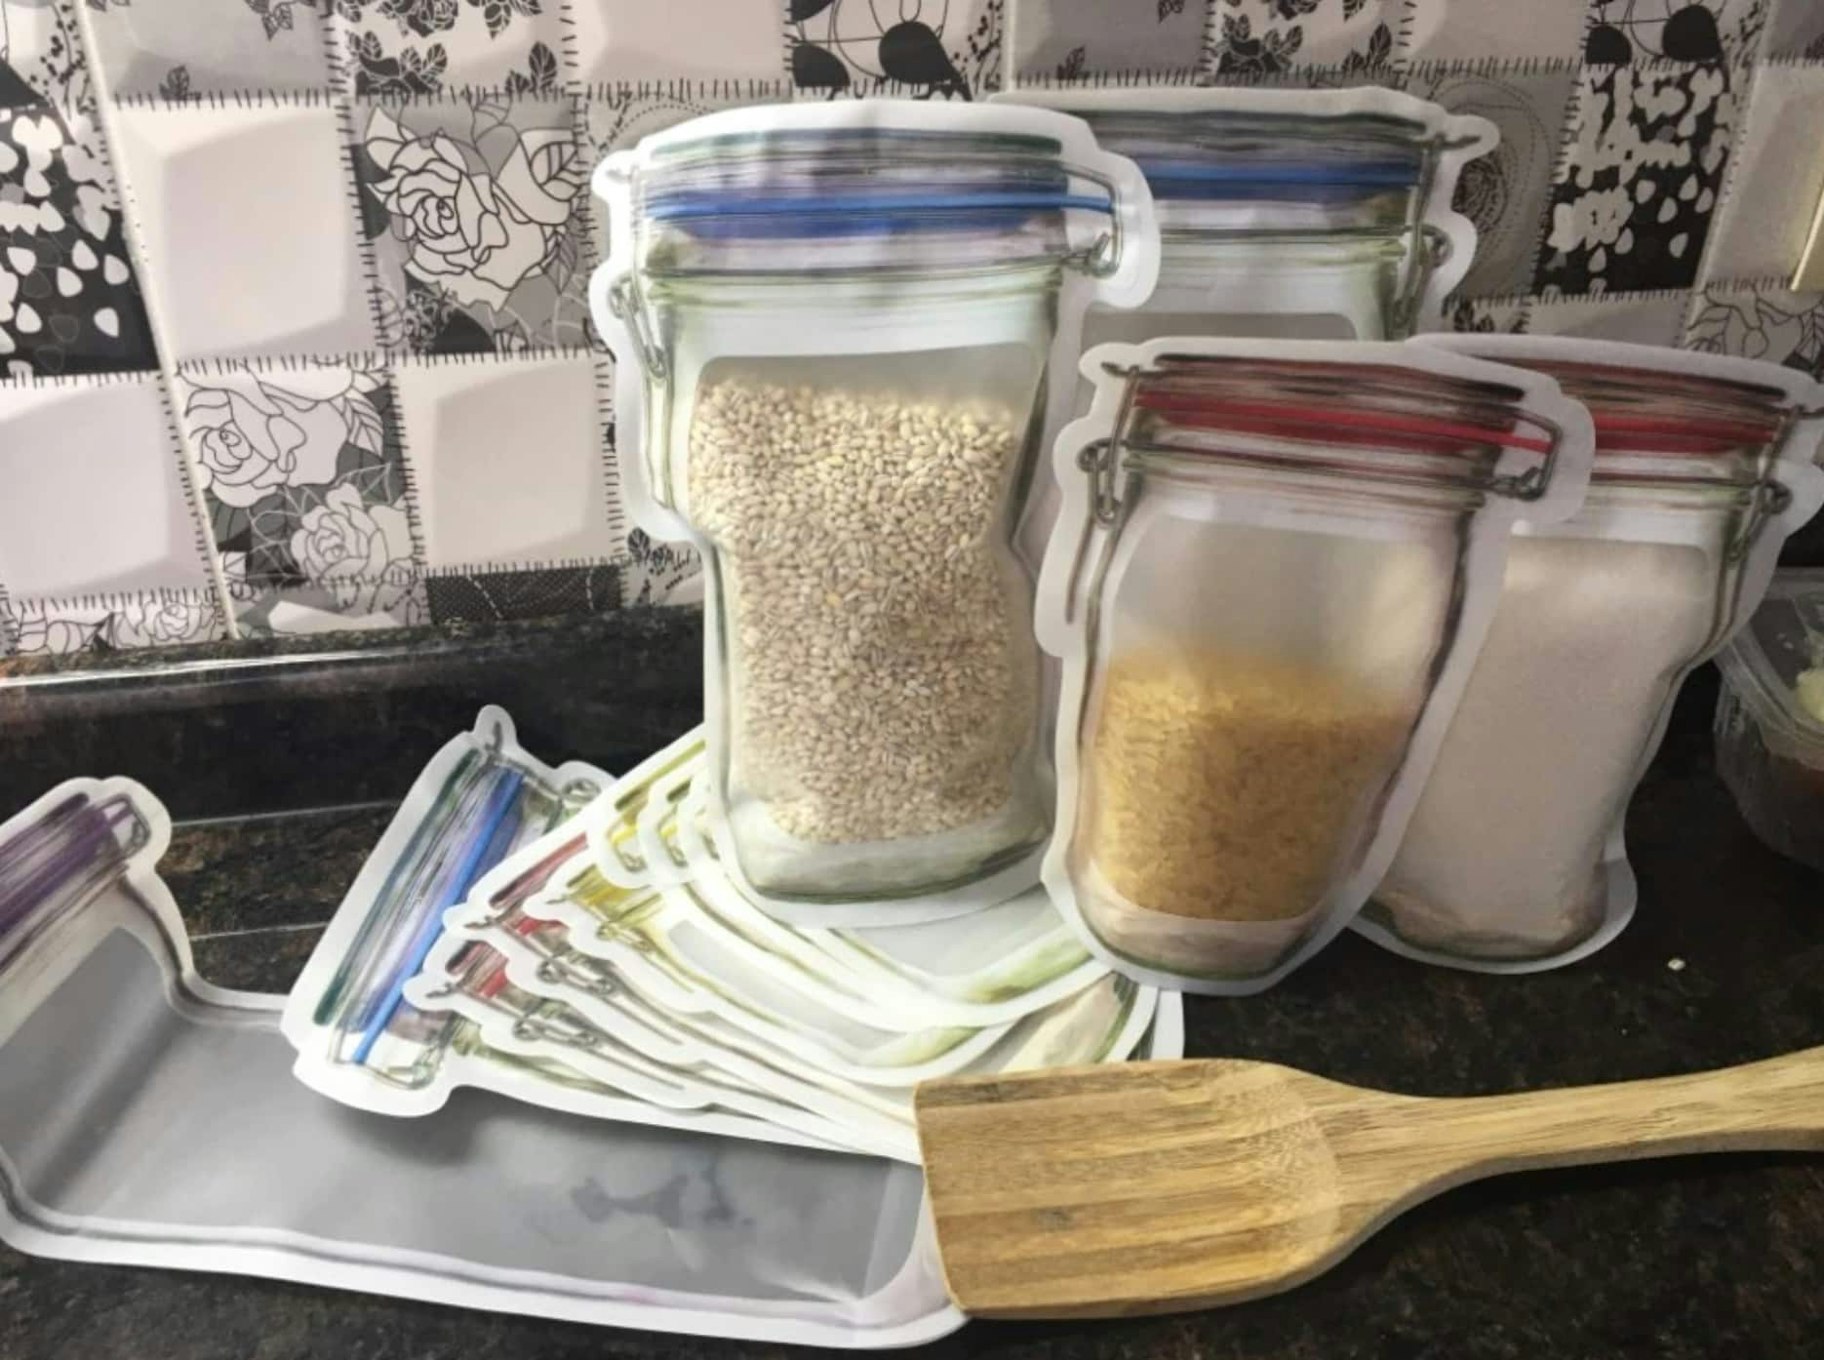 Reusable storage bags filled with pasta and oats